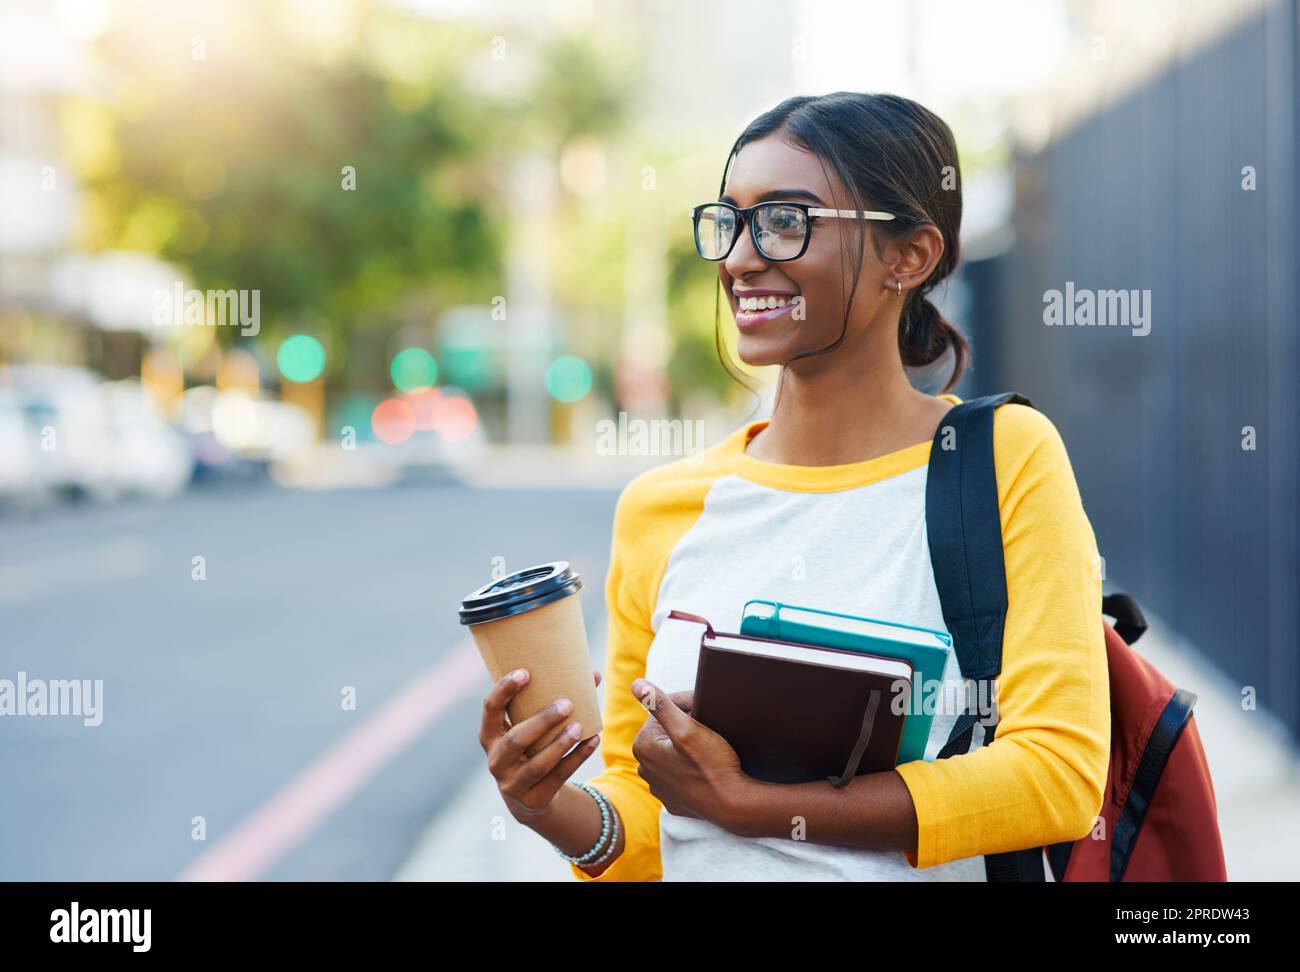 Commuting in the city to college. a young female student commuting to college in the city. Stock Photo